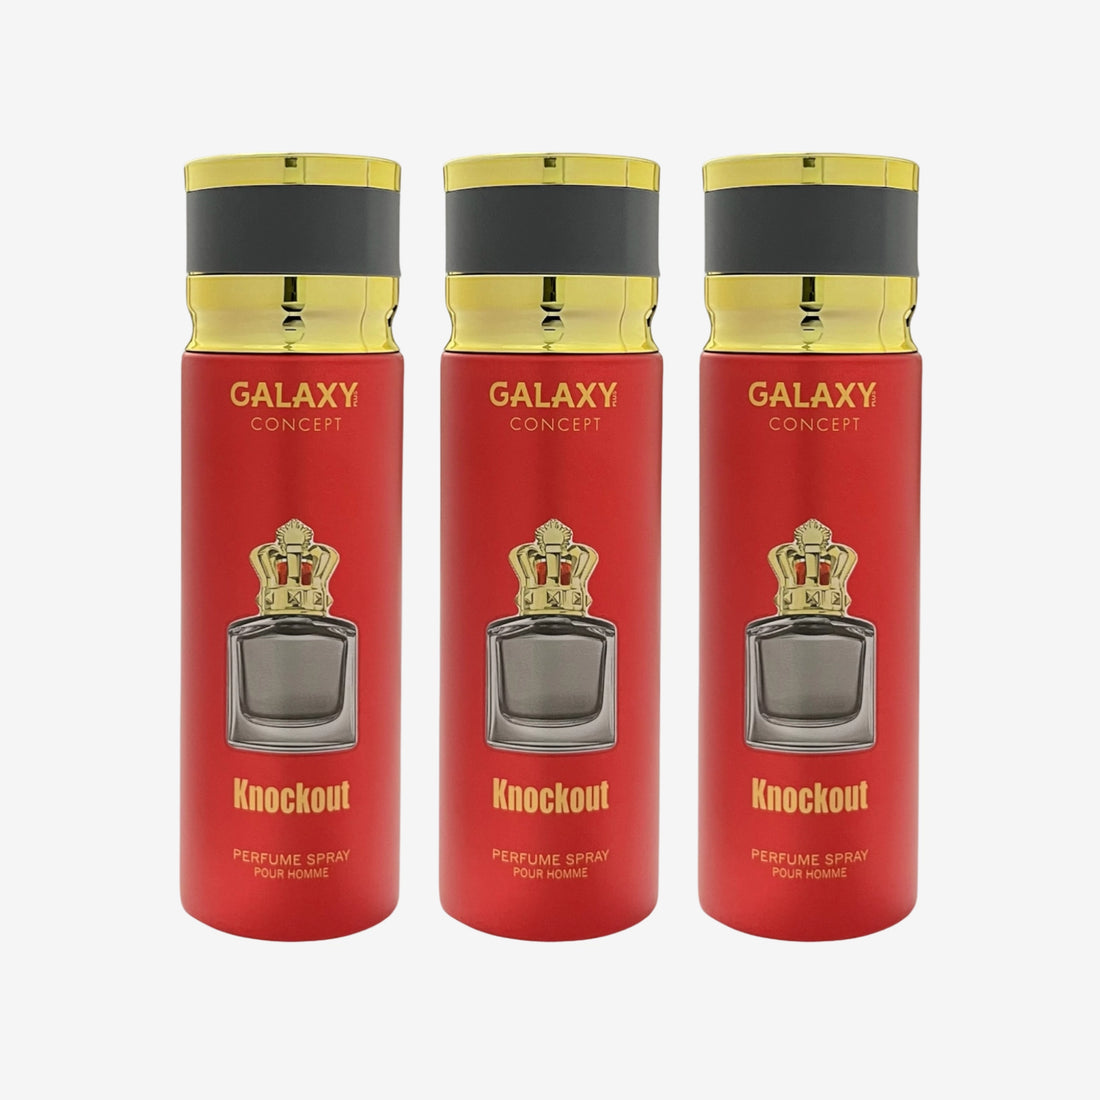 Galaxy Plus Concept KNOCKOUT Perfume Body Spray - Inspired By Scandal Pour Homme